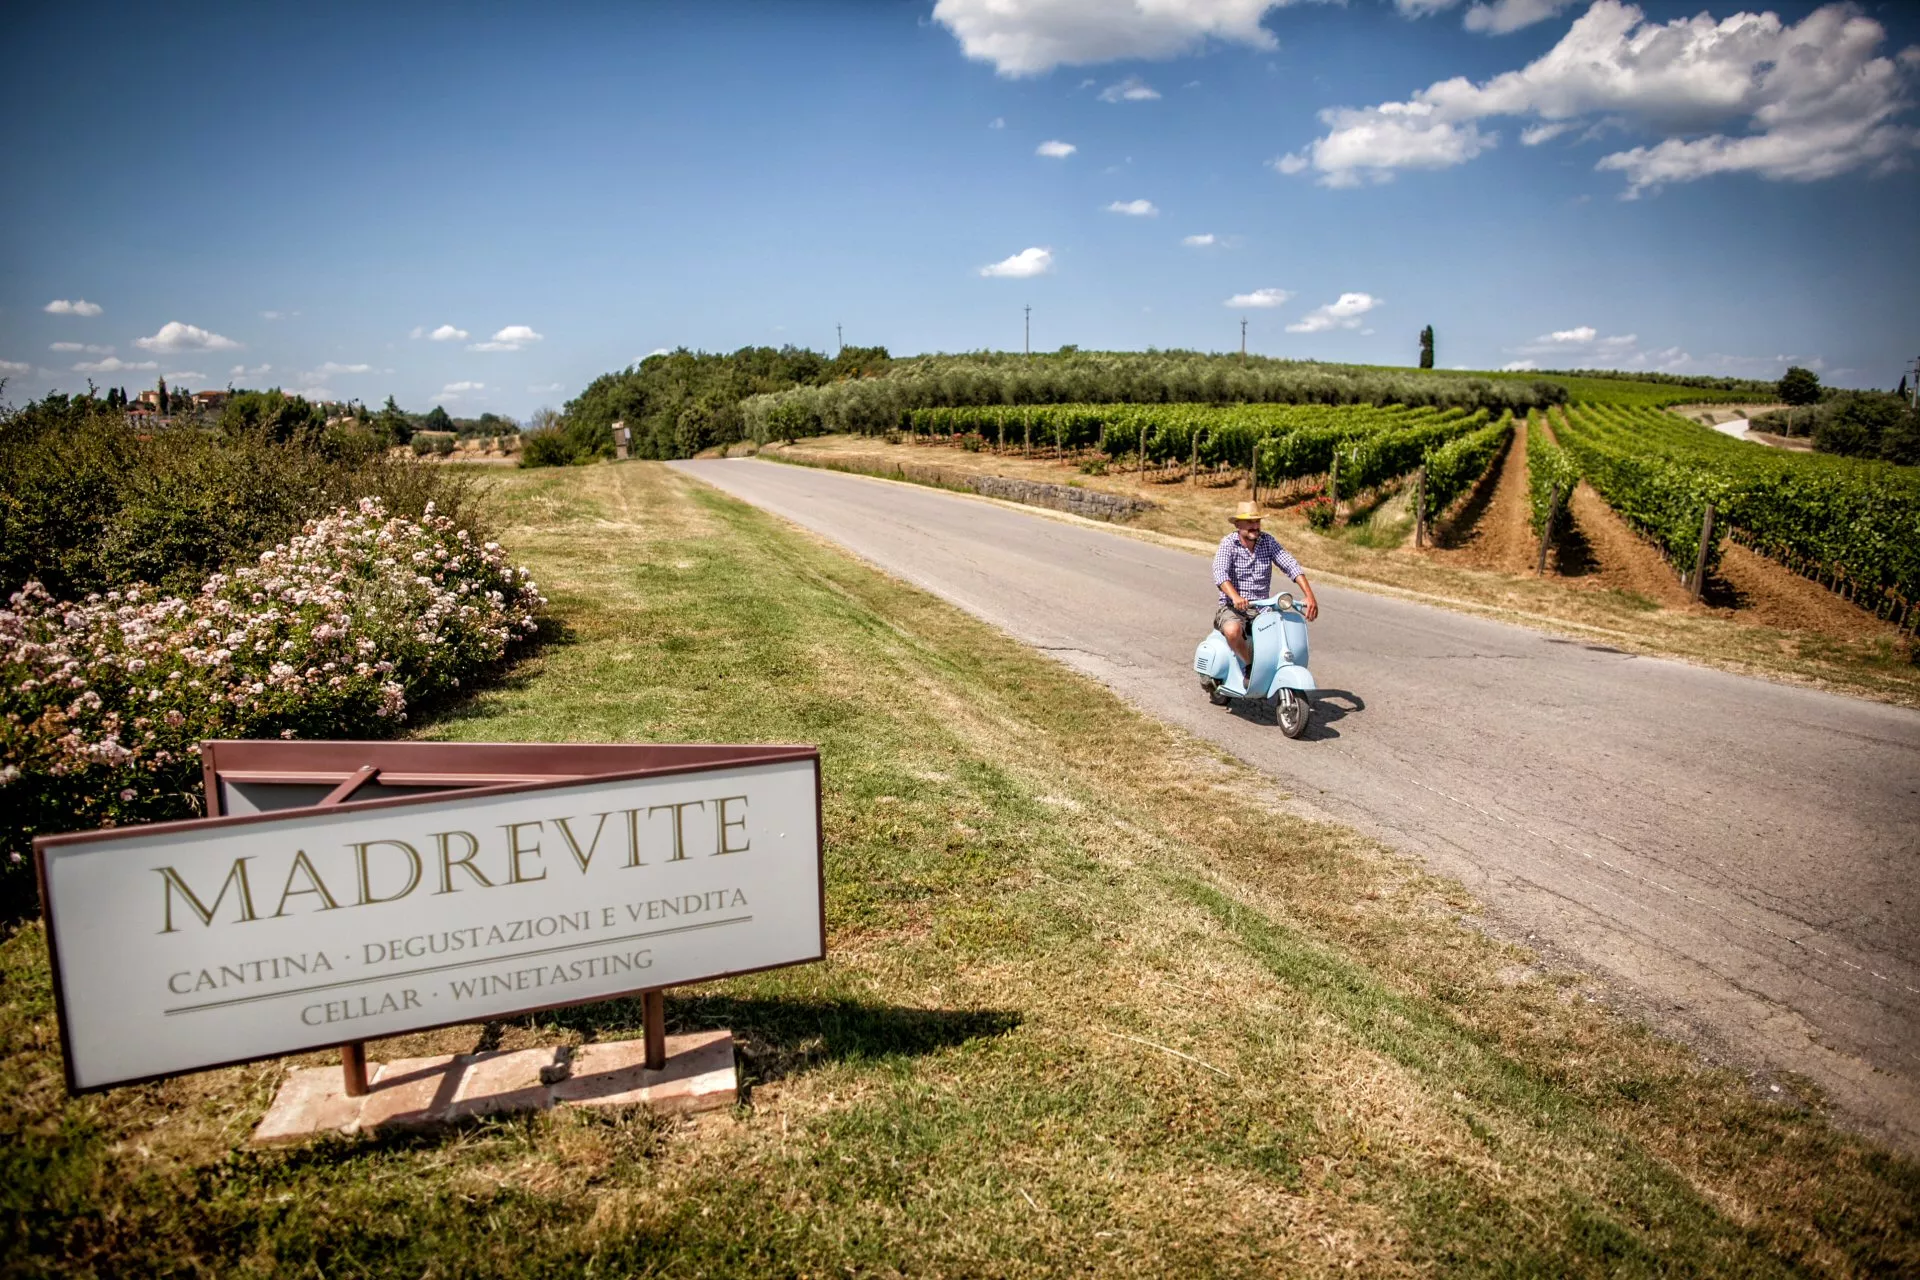 Madrevite in Italy, Europe | Wineries - Rated 0.9